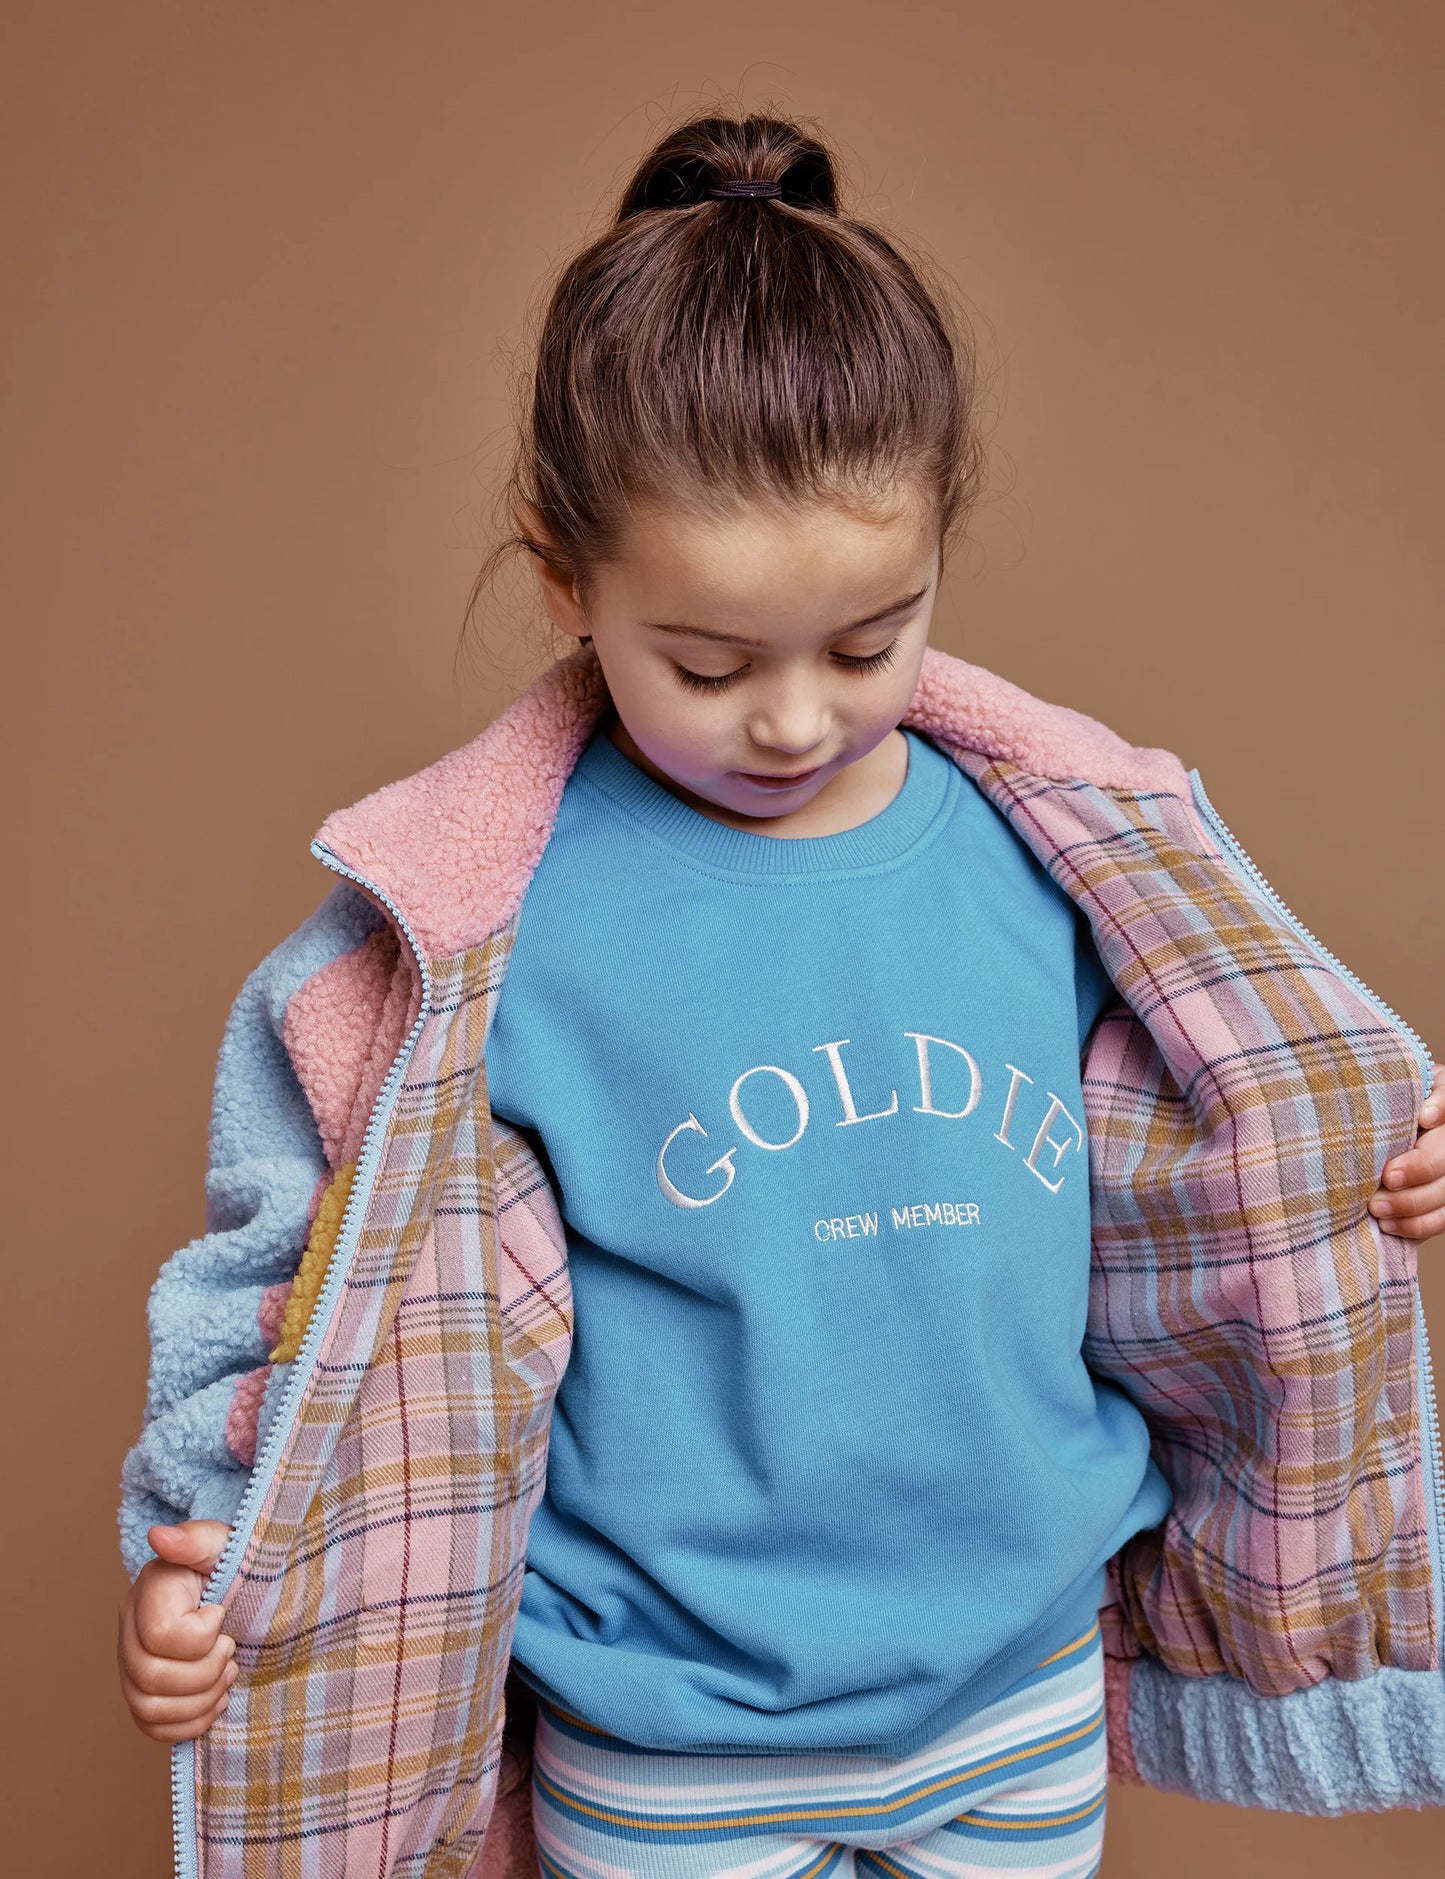 Goldie + Ace - Goldie Crew Embroidered Sweater Lake